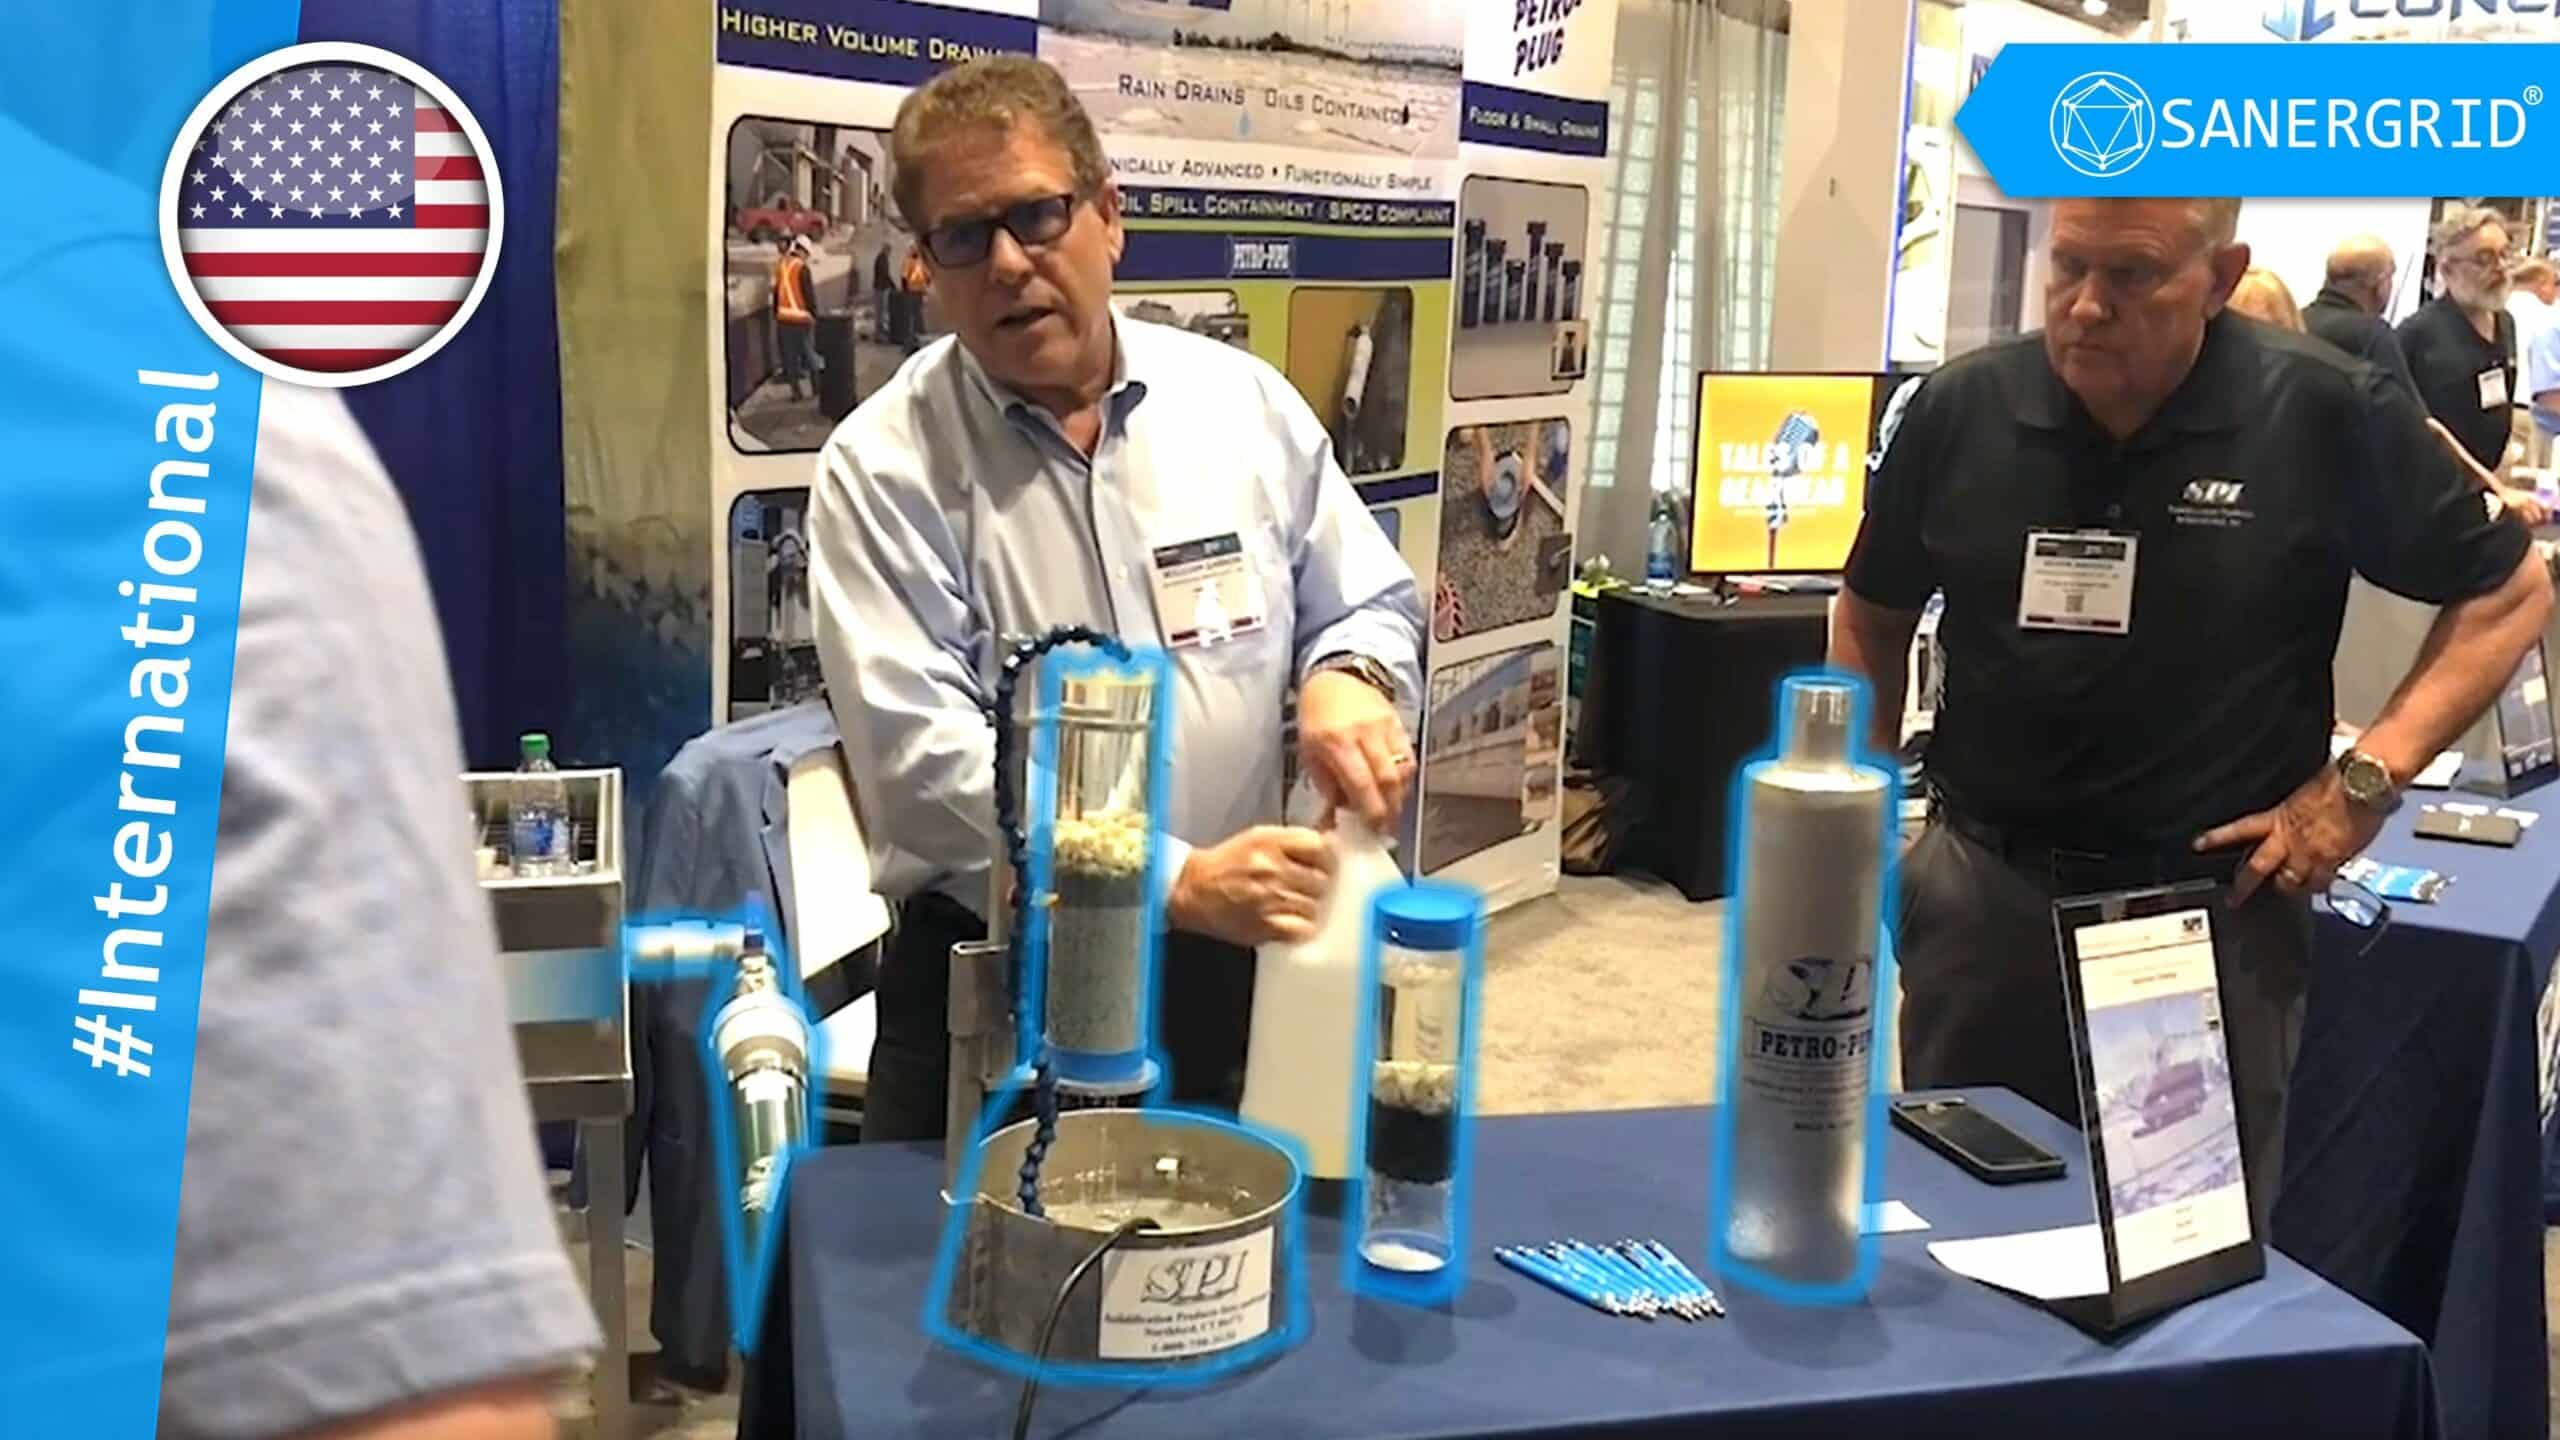 SANERGRID and Solidification Products International, Inc at the IEEE Power & Energy Society in New Orleans